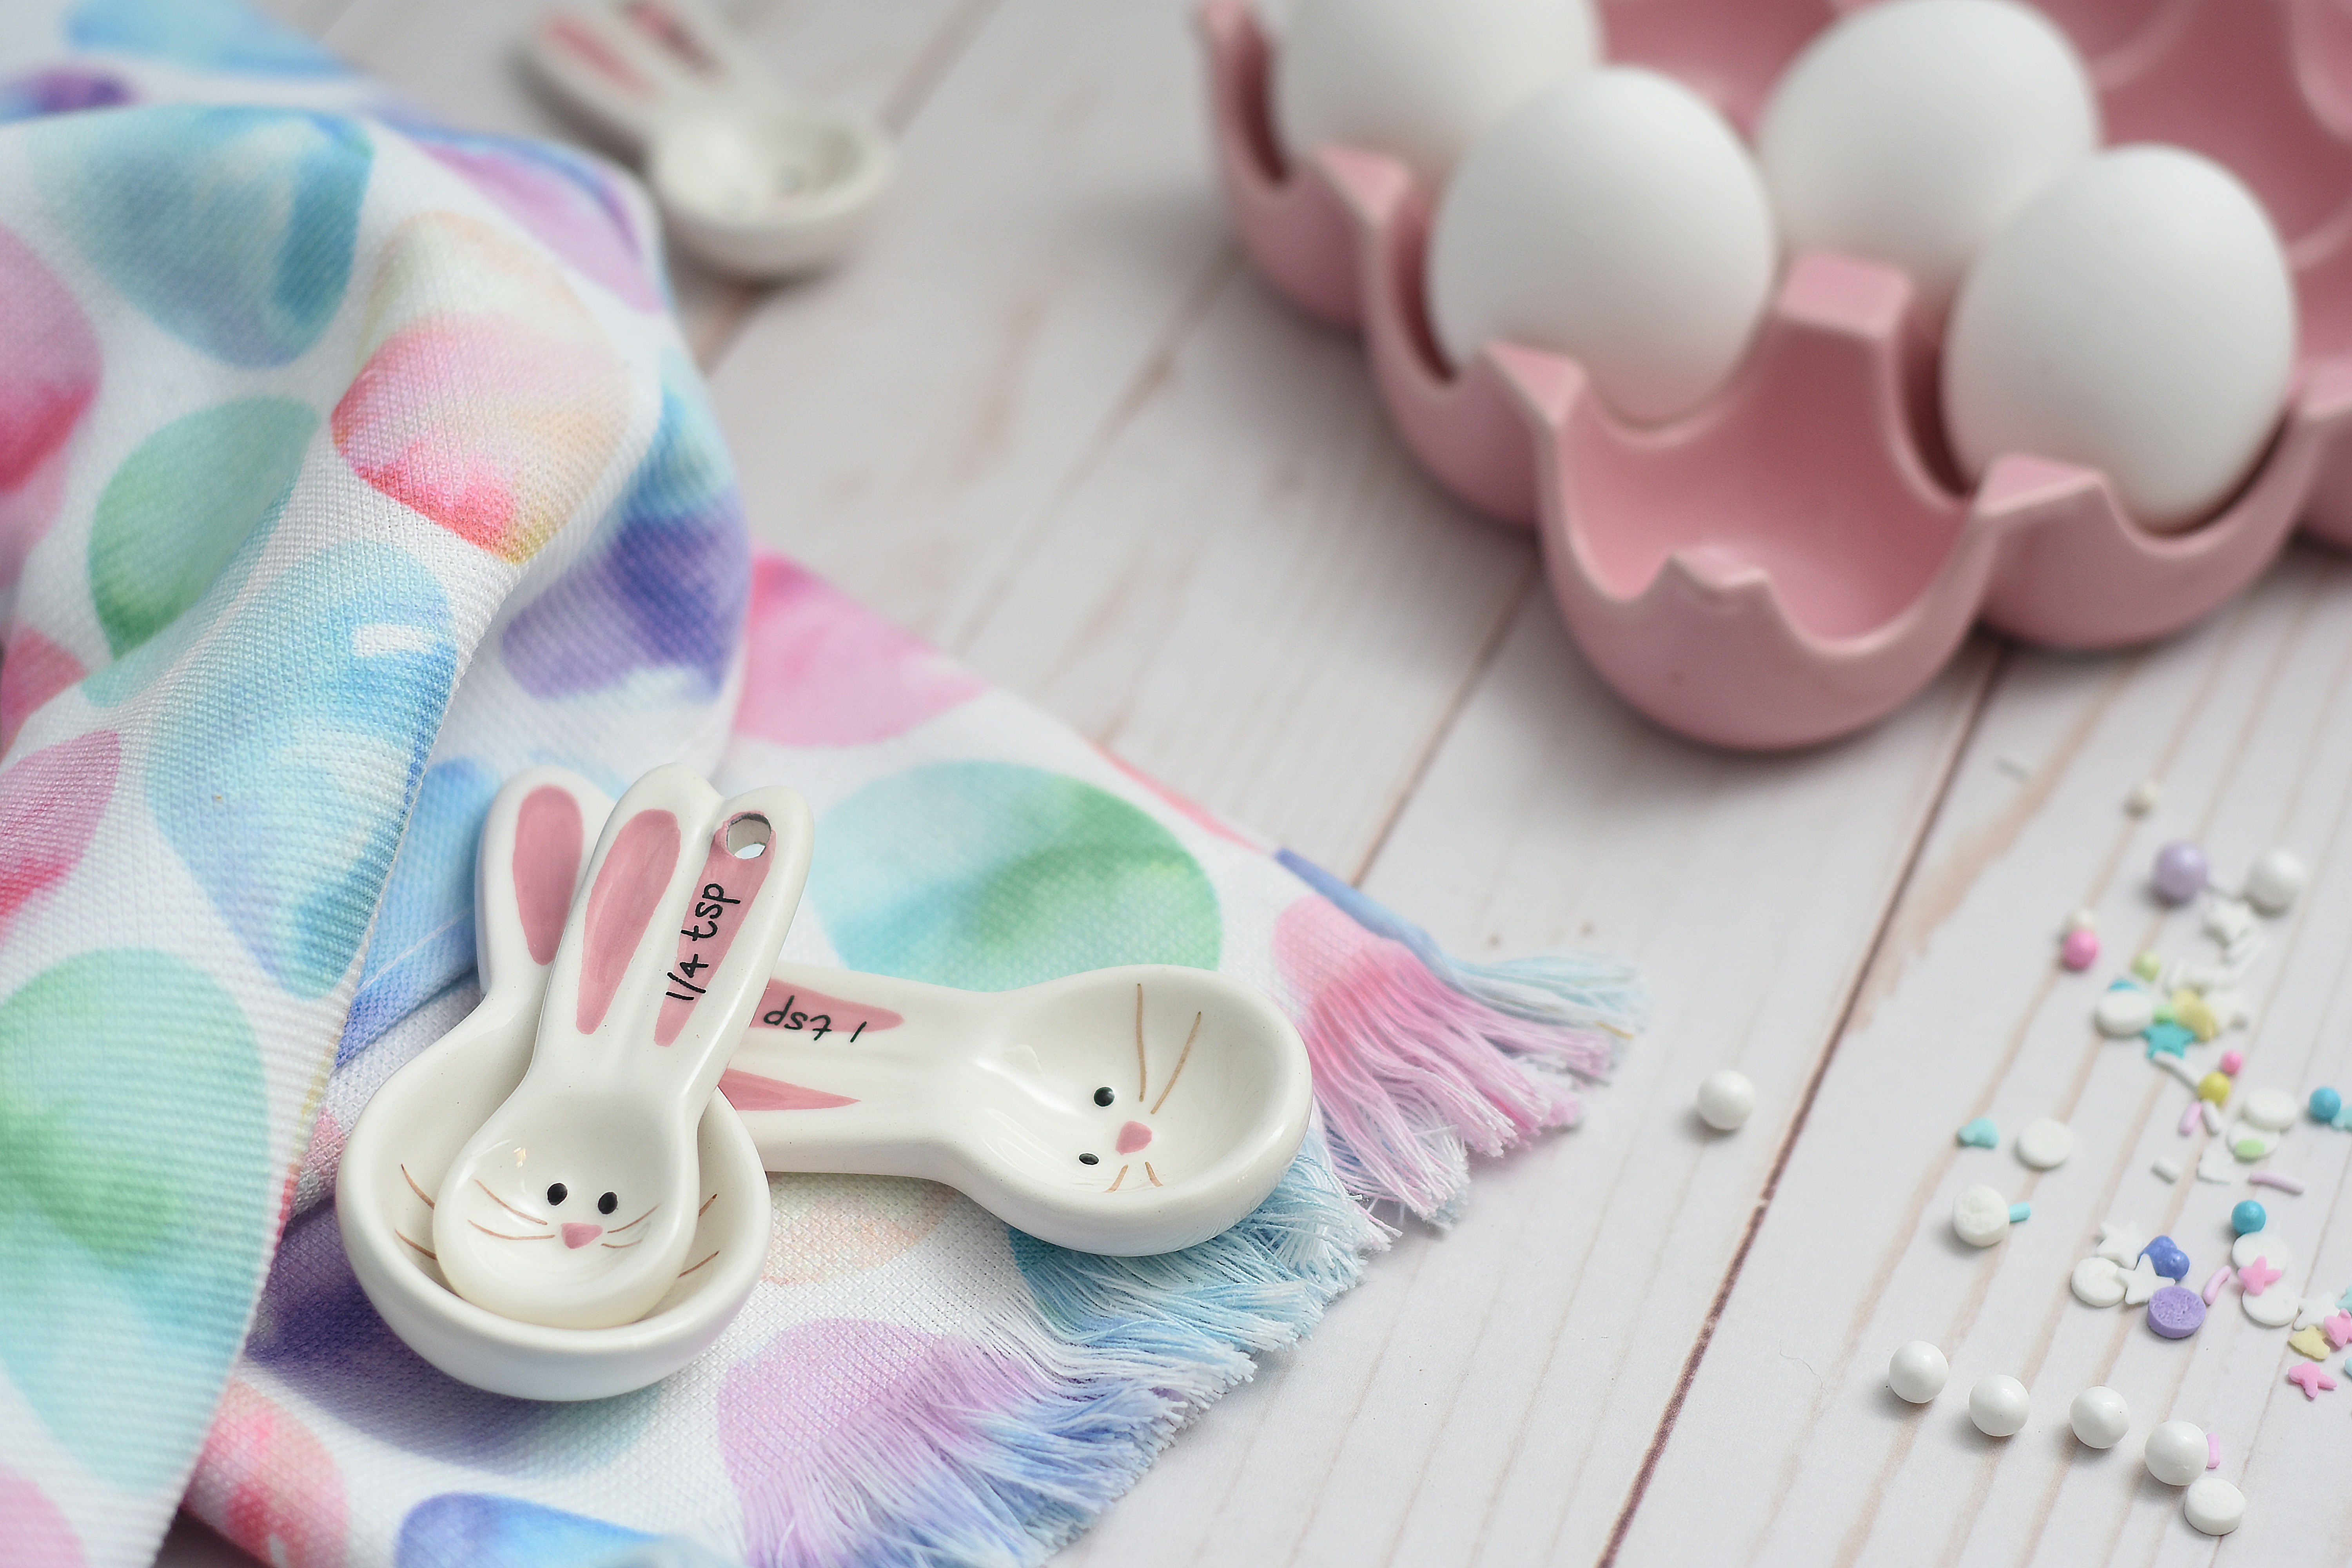 Spring has sprung and now it is time to create more colorful and tasty things. Aren’t these spoons a catch?!